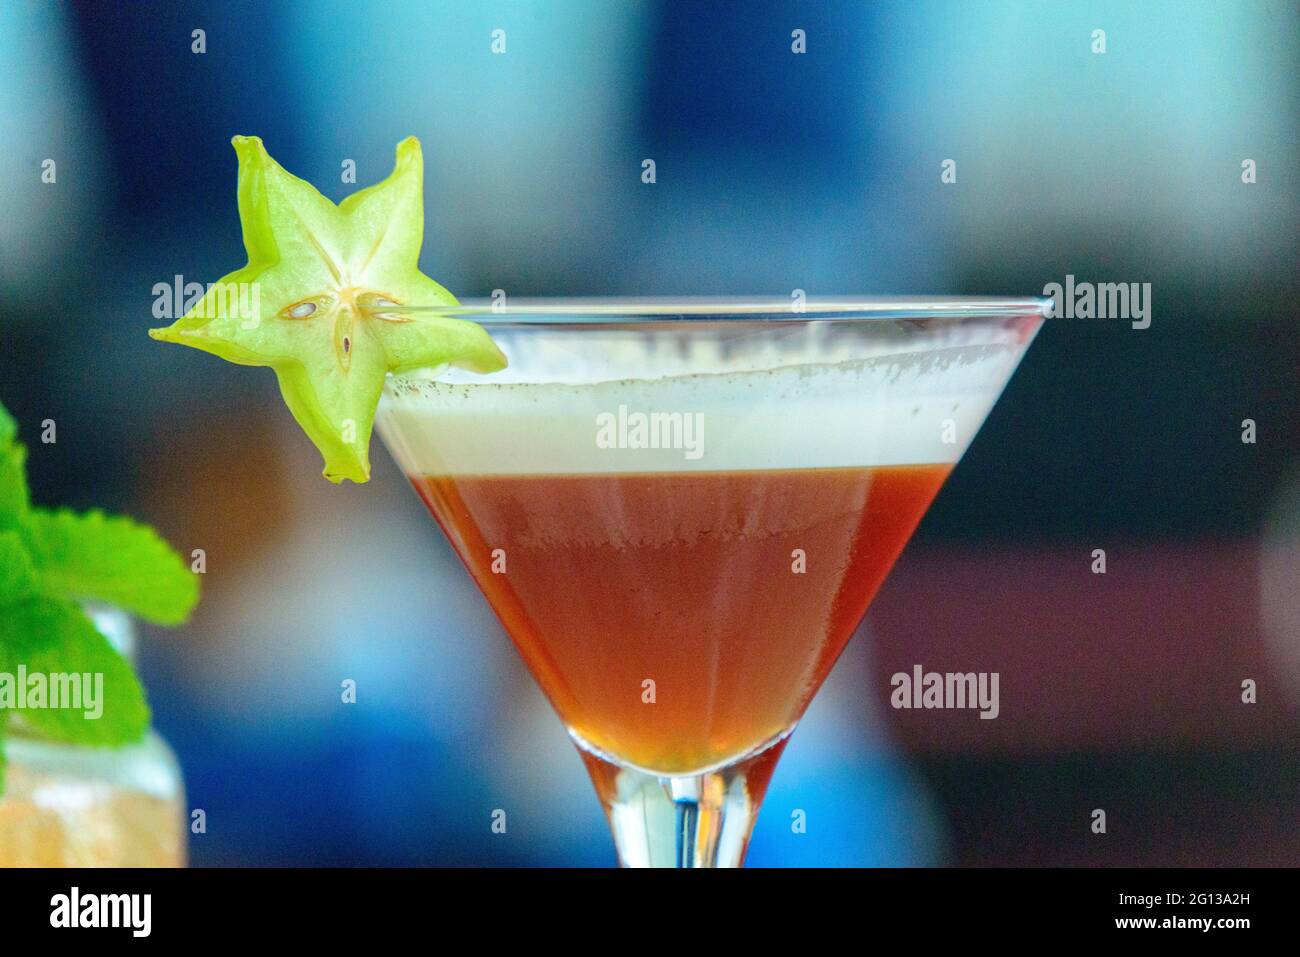 Detail of a glass with a cocktail garnished with a cut of carambola, Chinese fruit, Valencia, Spain Stock Photo